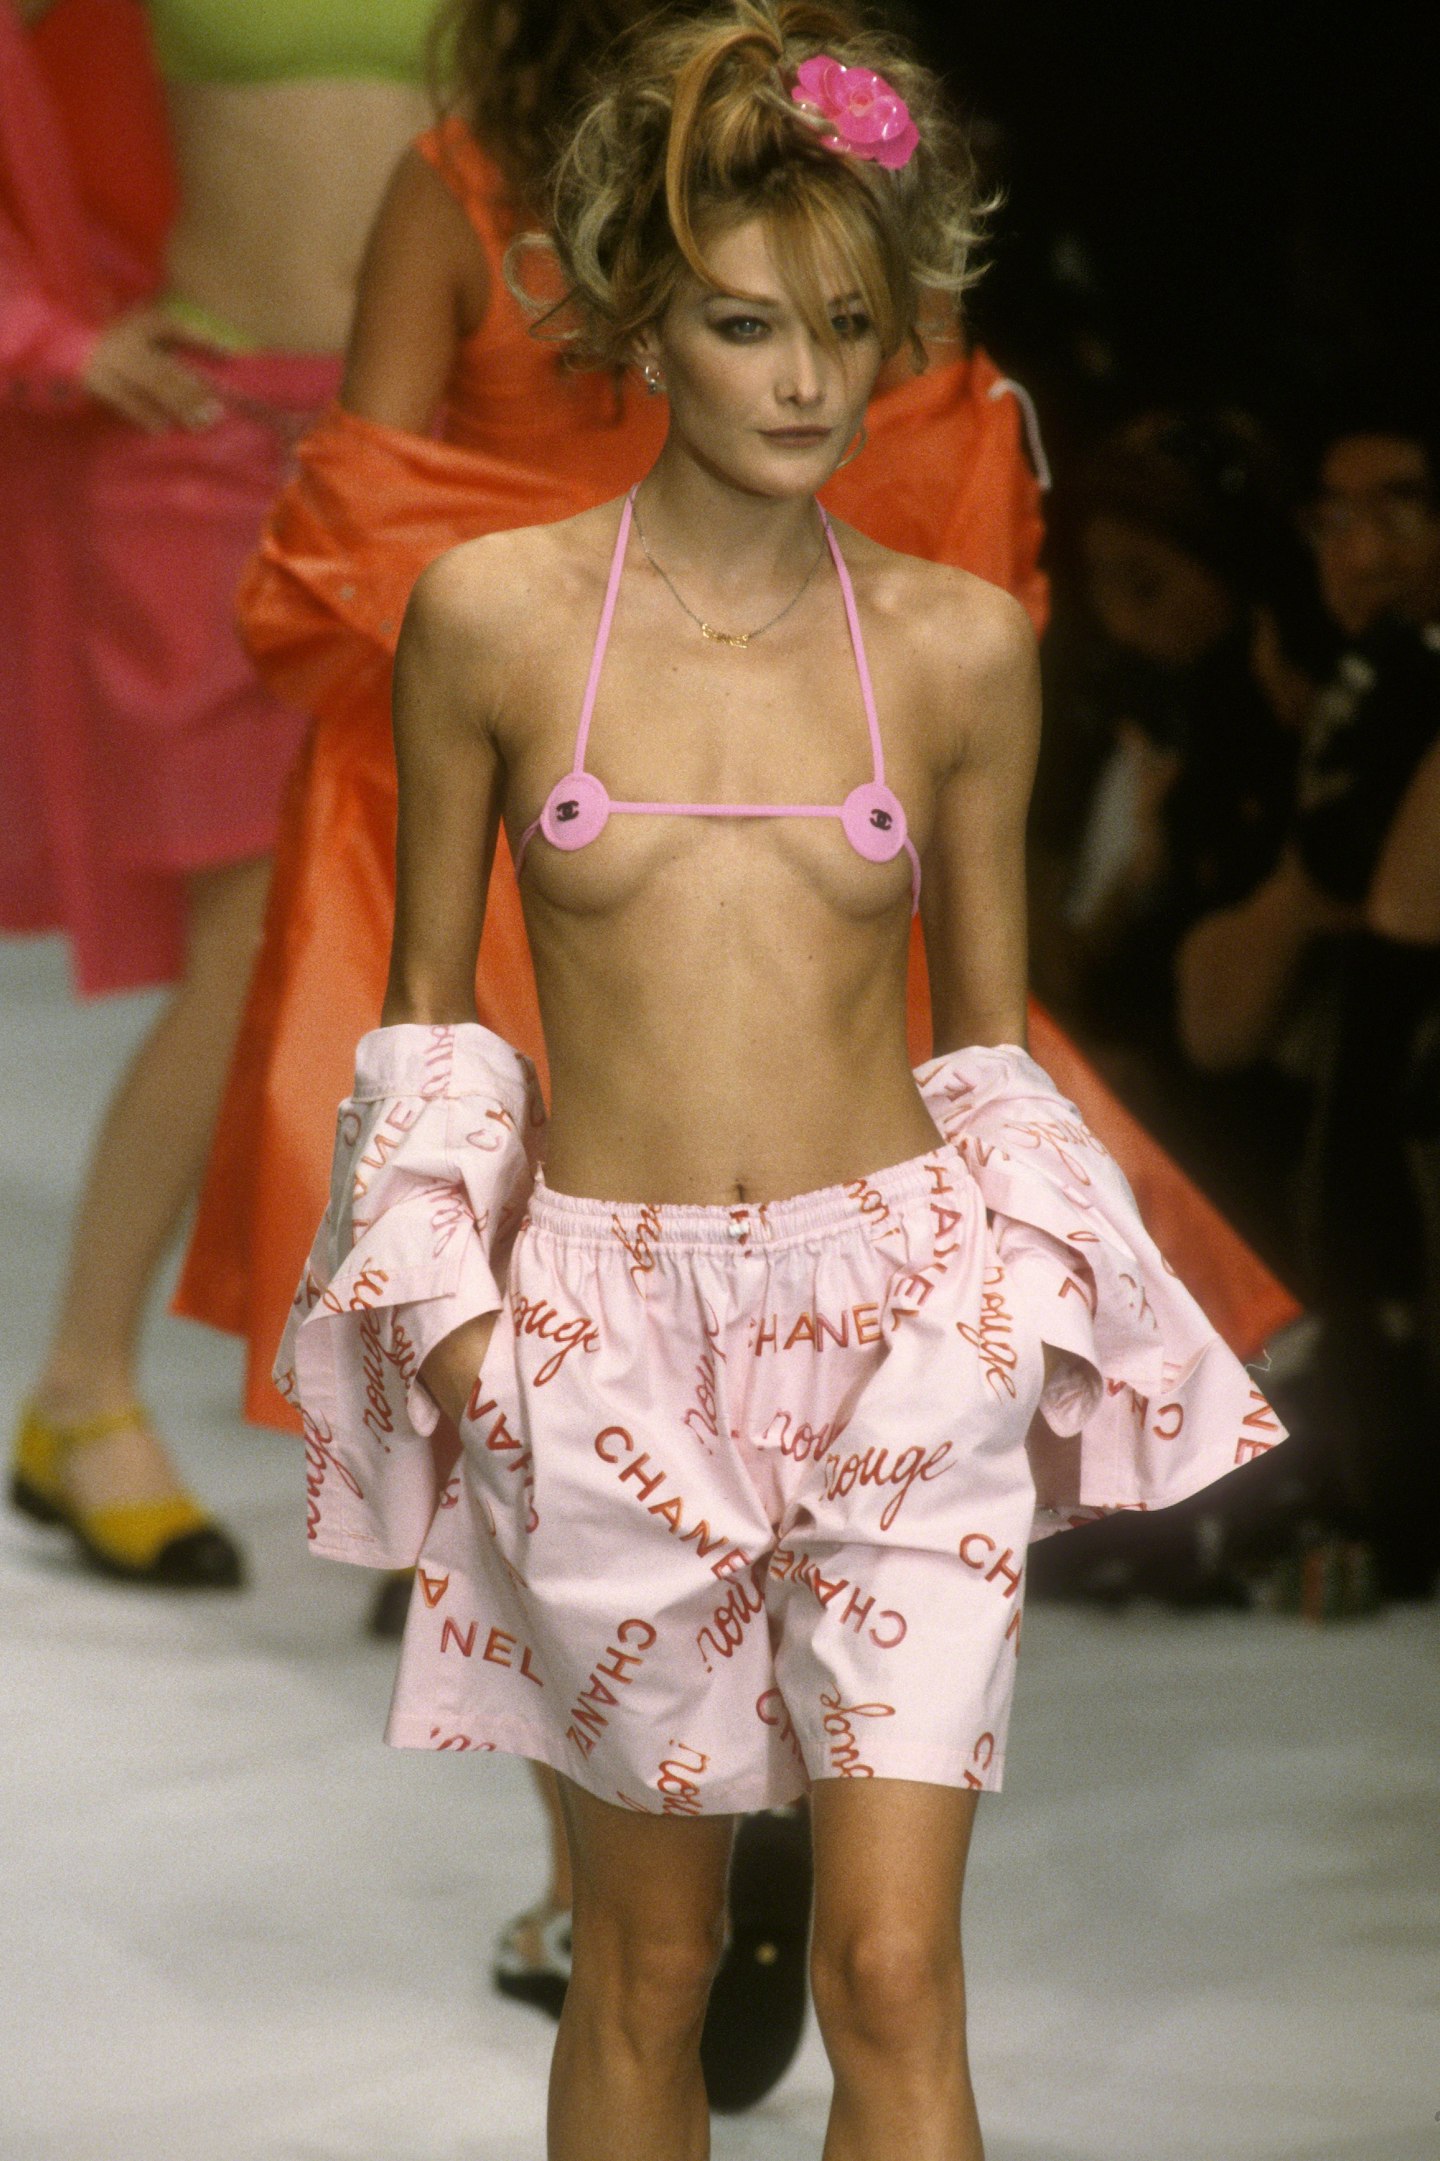 Chanel exhibition catwalk moments Carla Bruni On The Runway For The Chanel Spring 1996 Collection